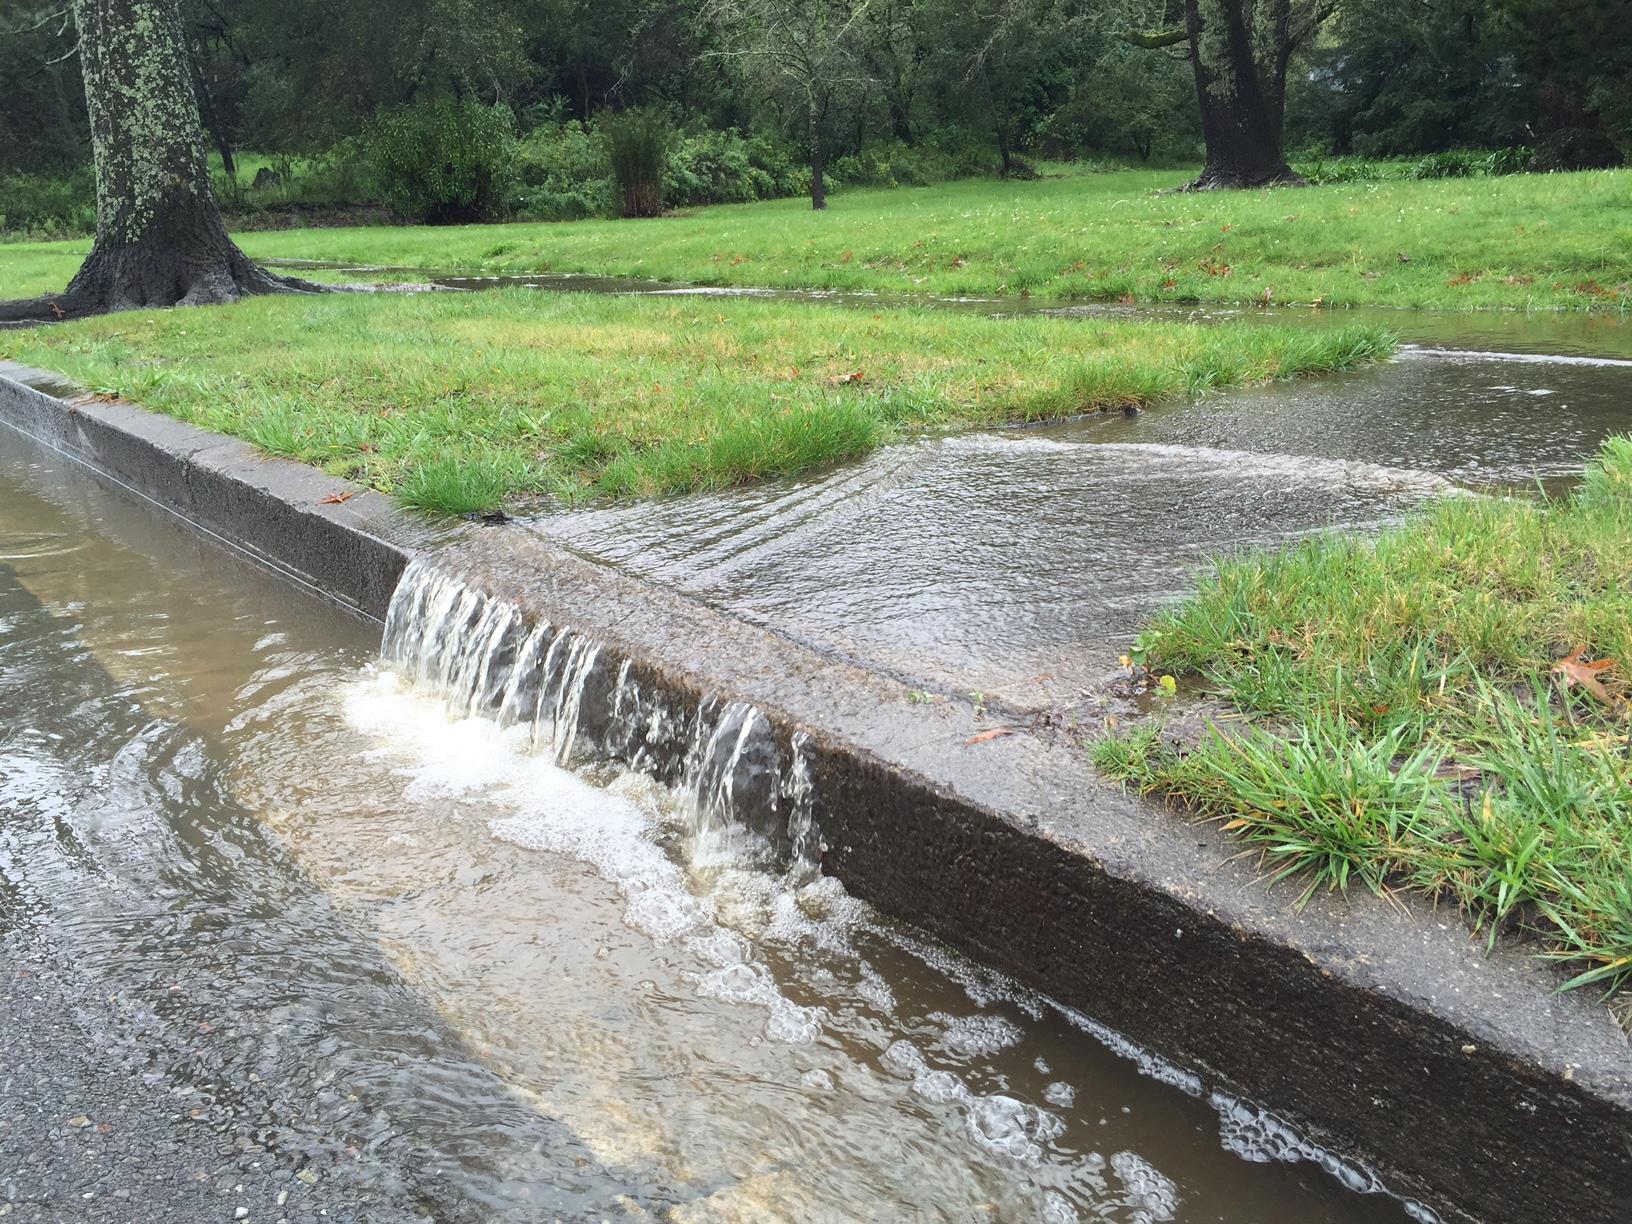 Catching Storm Runoff Could Ease Droughts, But It's No Quick Fix ...